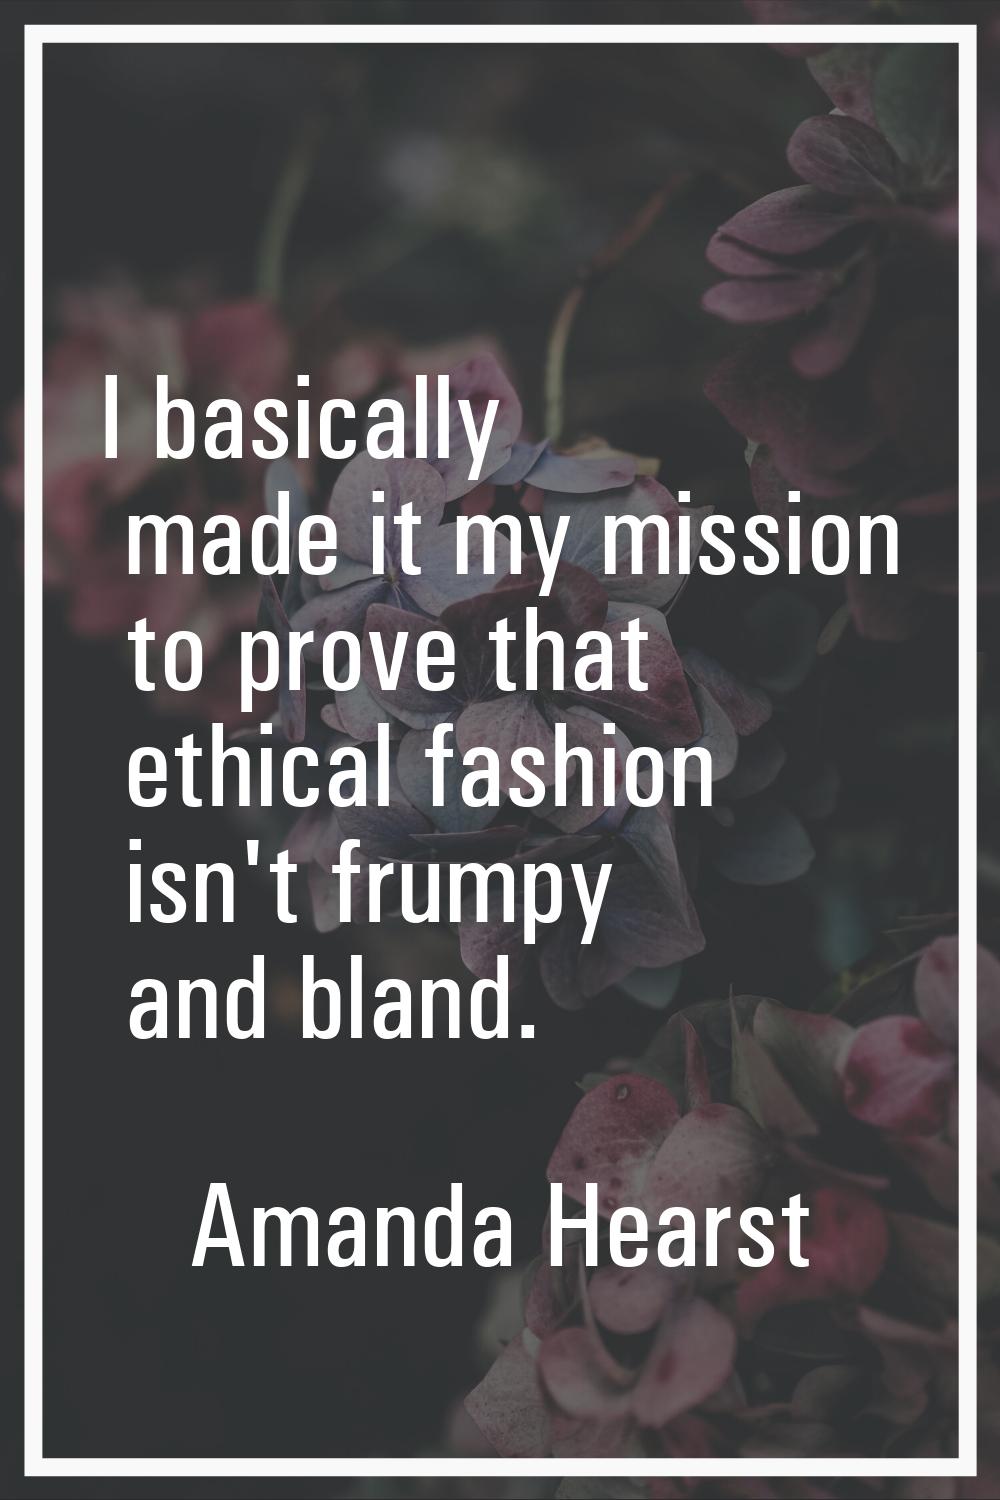 I basically made it my mission to prove that ethical fashion isn't frumpy and bland.